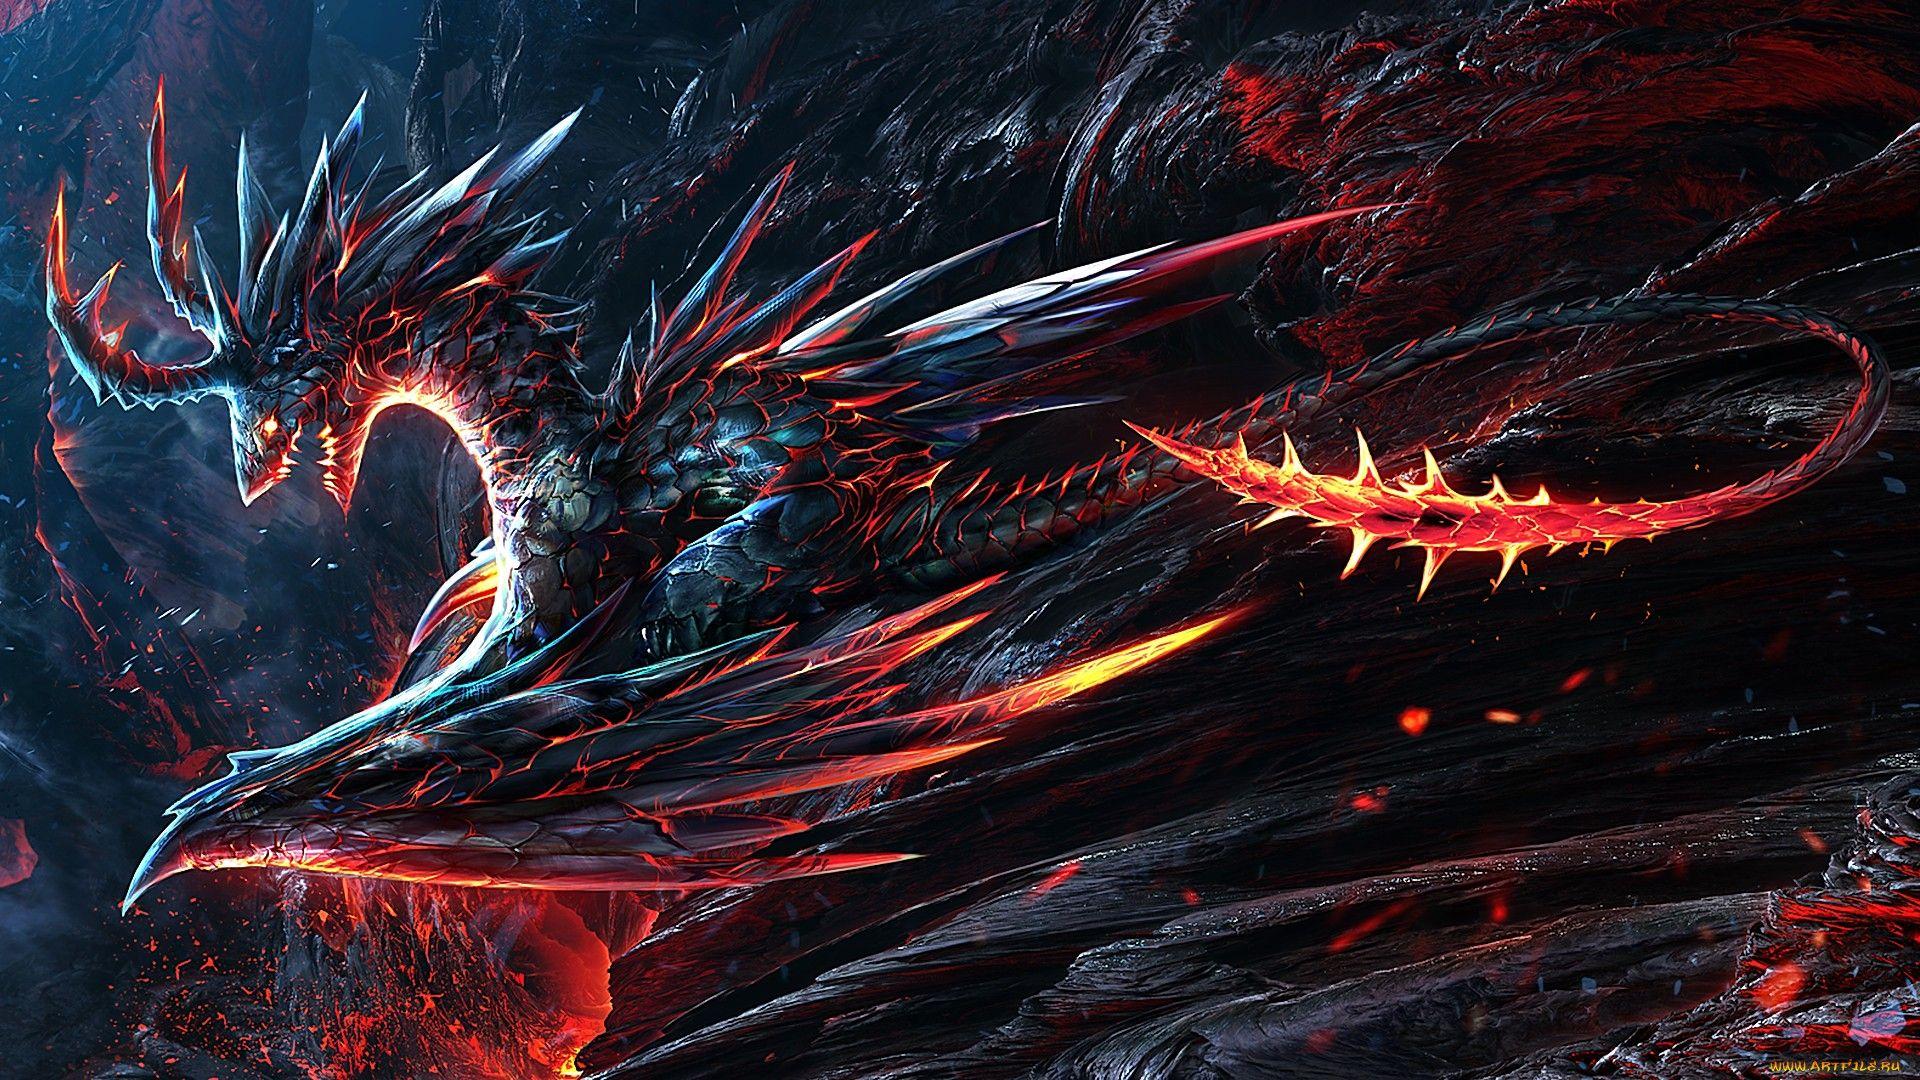 Coolest Dragon Wallpapers on WallpaperDog